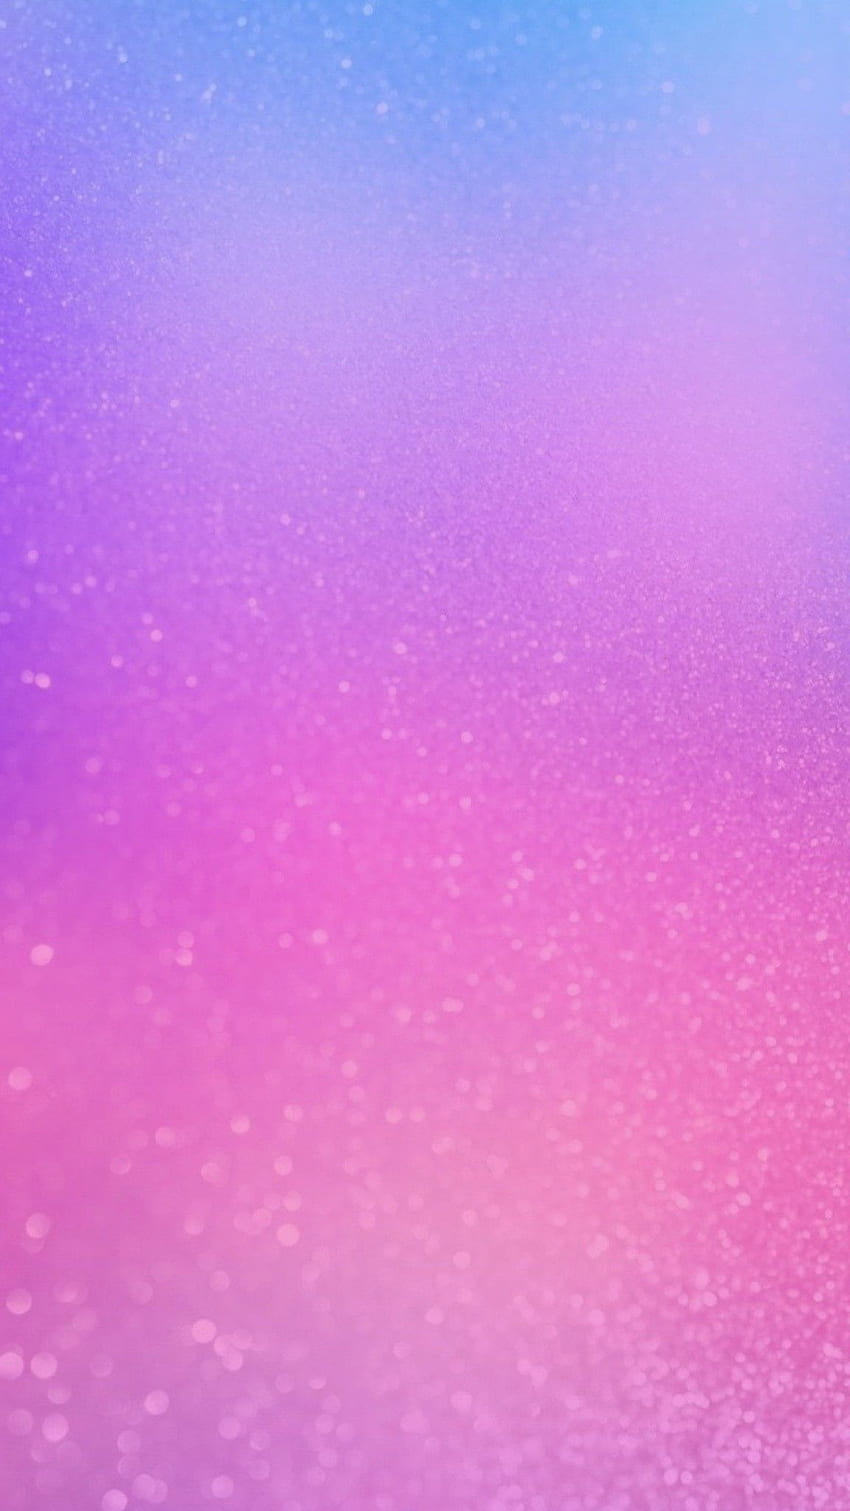 Share more than 52 ombre purple wallpaper best - in.cdgdbentre